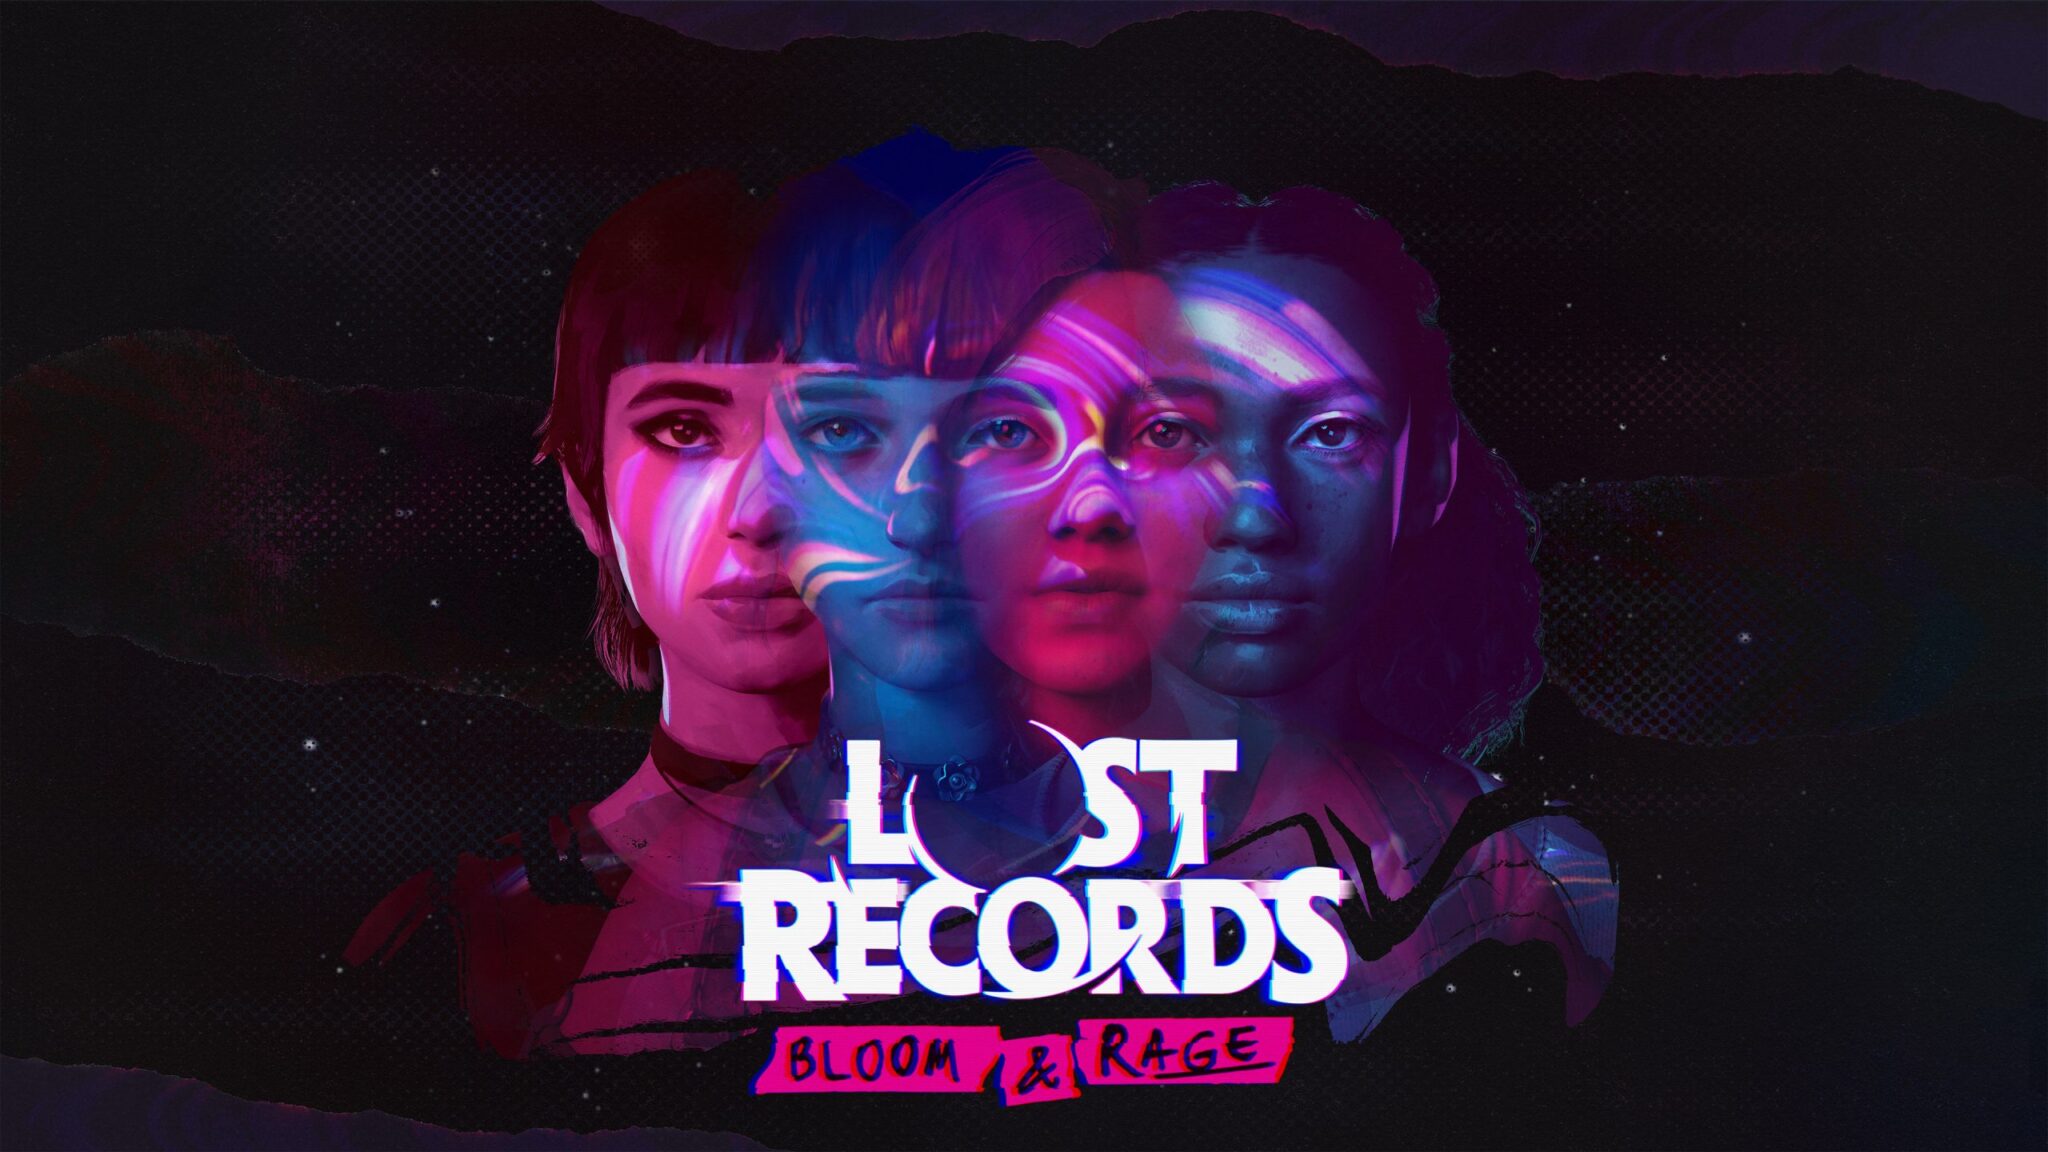  Lost Records: Bloom & Rage